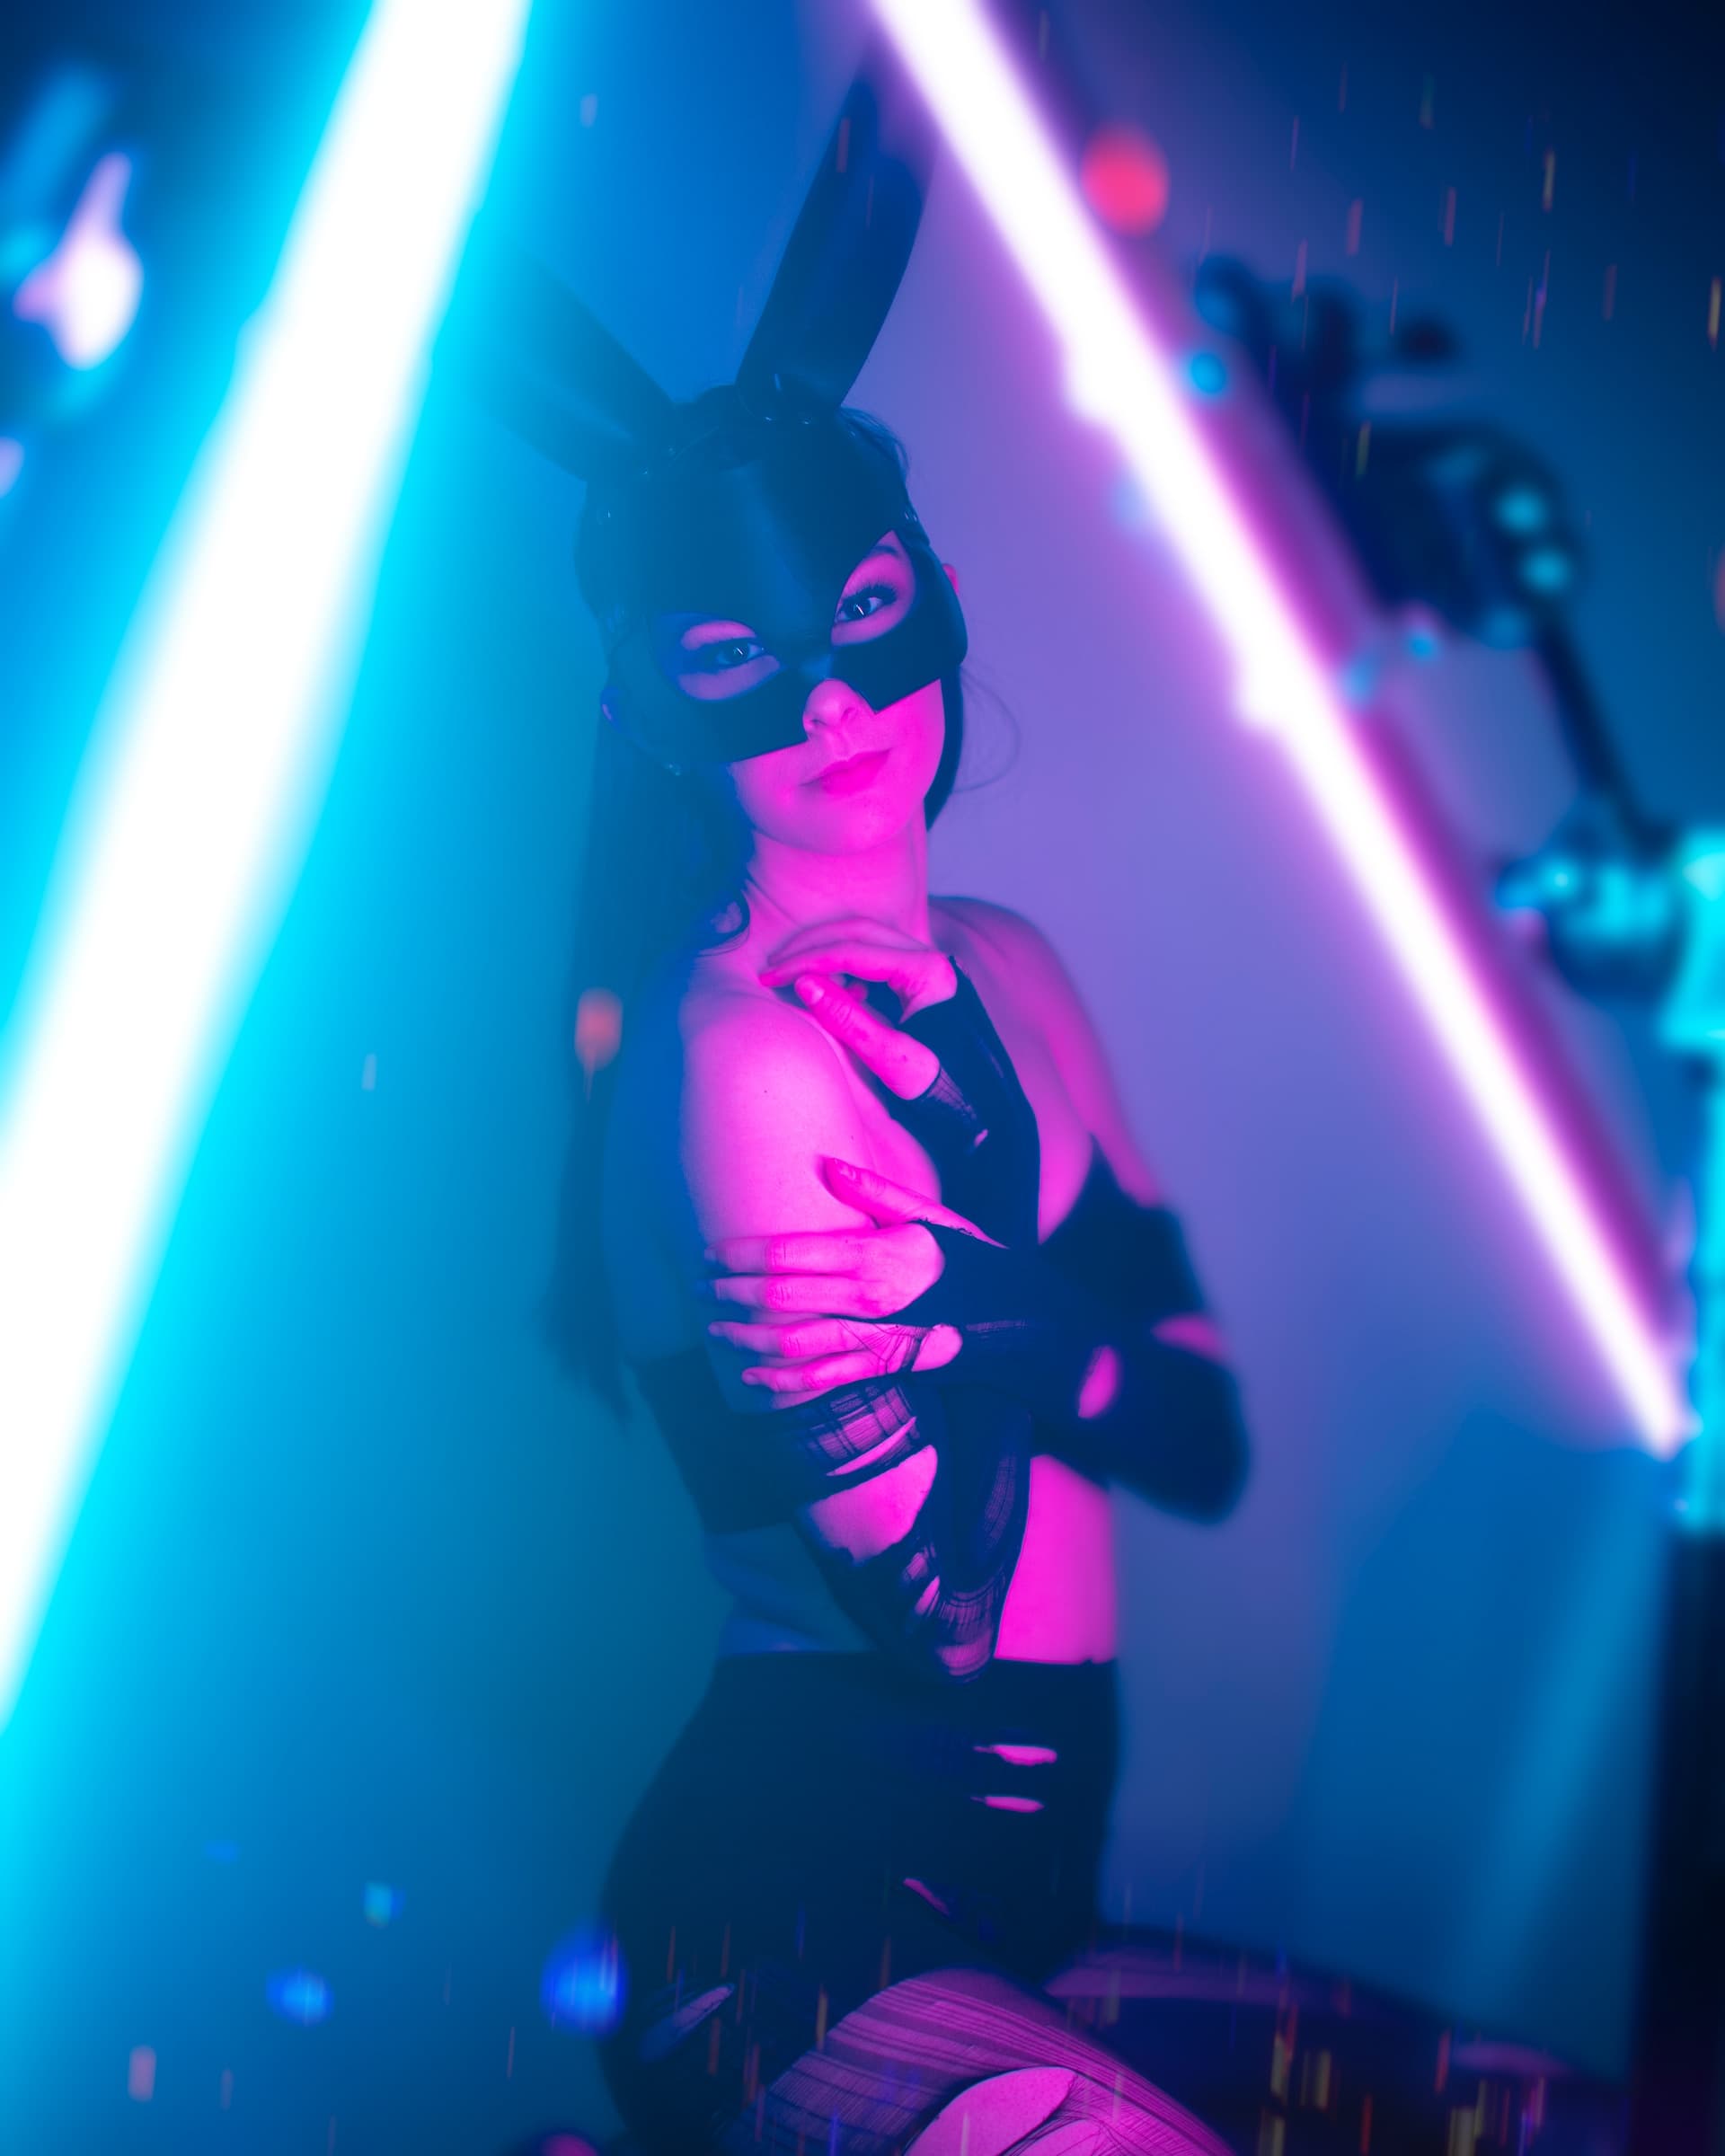 a woman wearing leather beds mask with bunny ears hiding her breast with her hands in a colourful neon lighting